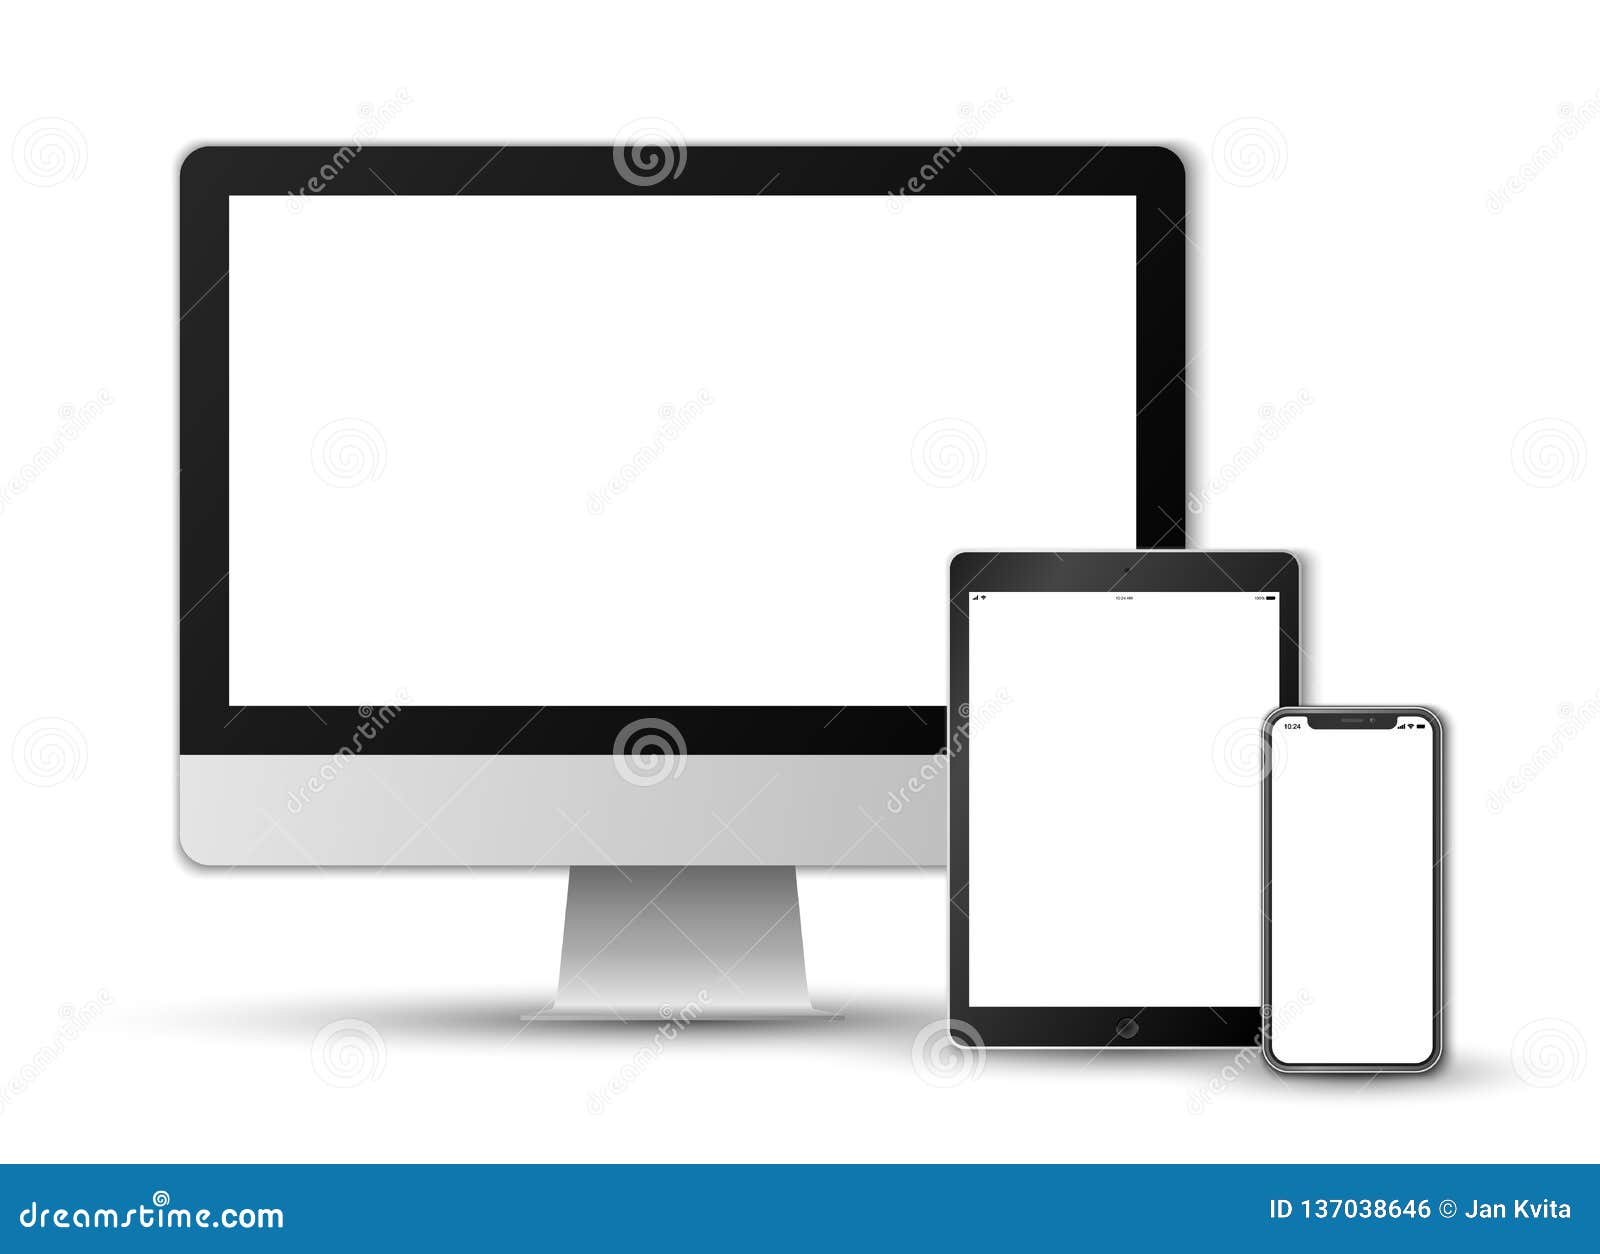 realistic  set on white background of a modern black colored smartphone, a tablet and a computer screen with white screens